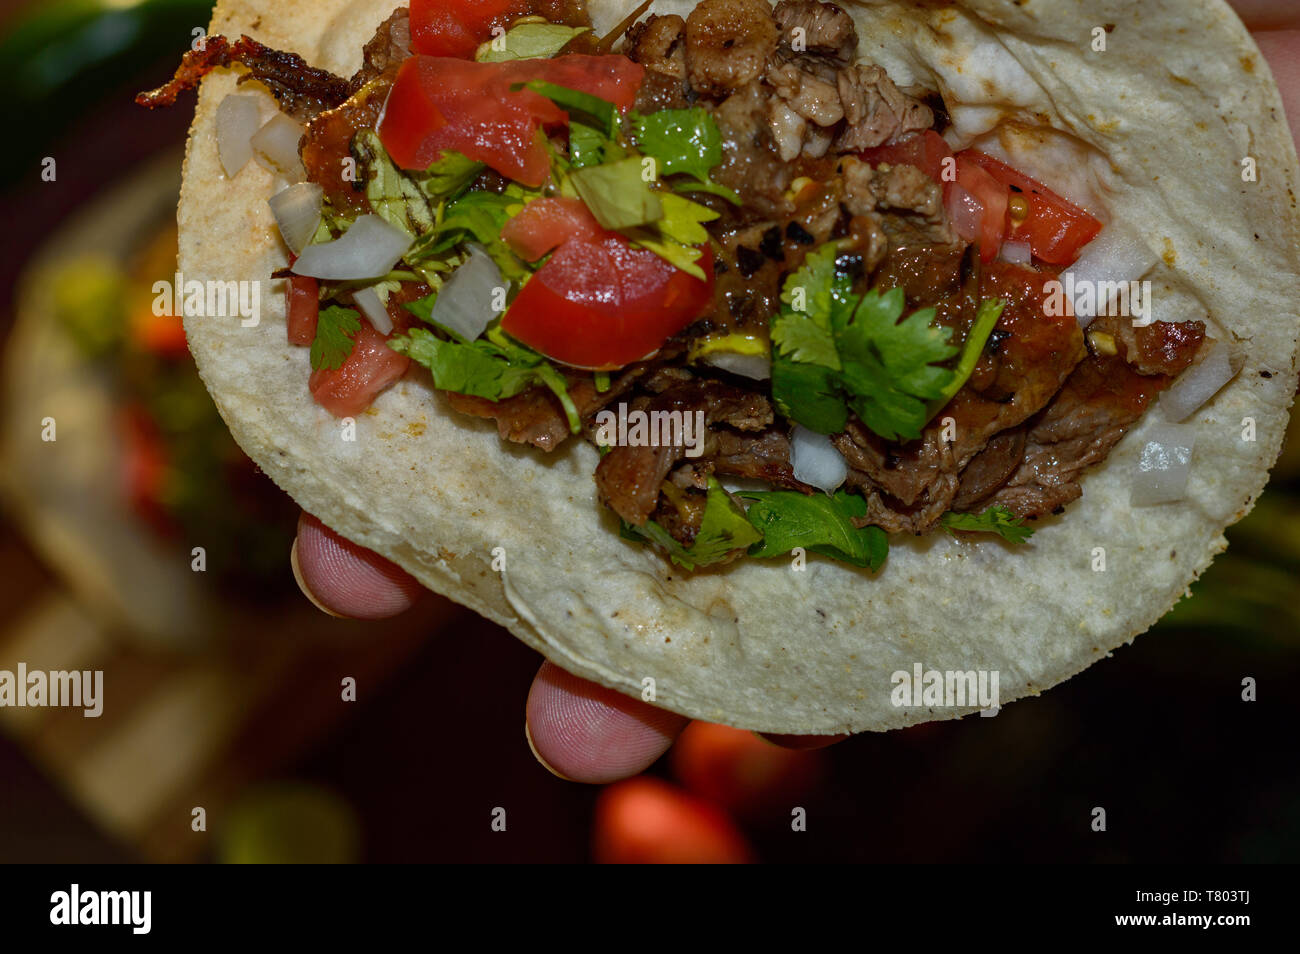 Mexican tacos, holding grilled carne asada taco with radishes, limes, spring onions, low key with copy space Stock Photo